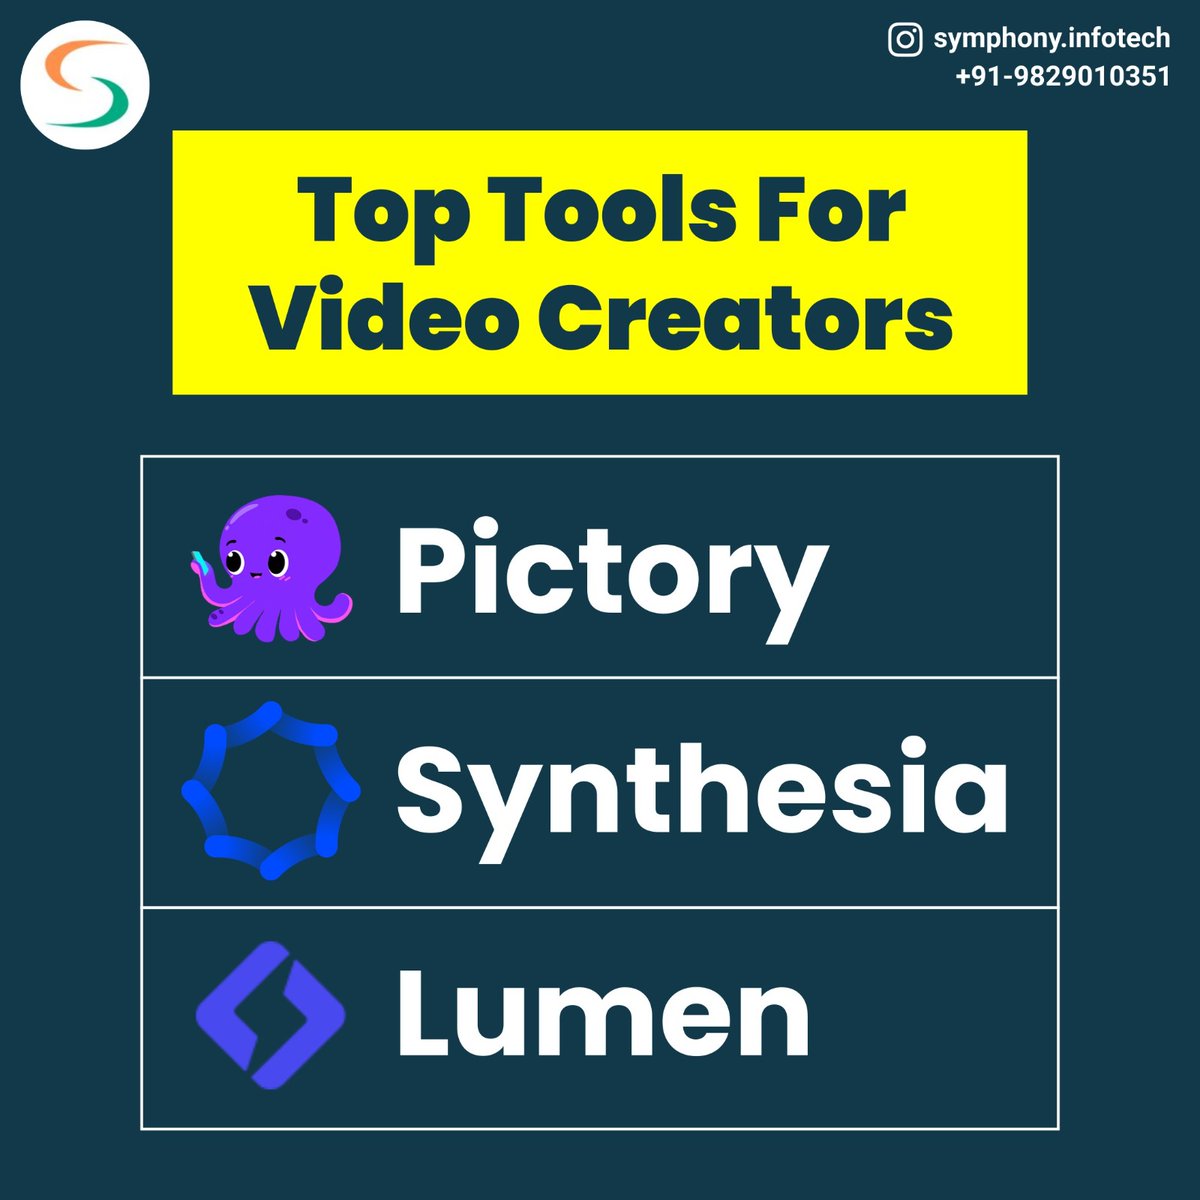 Discover the game-changing tools that every video creator needs to bring their vision to life and captivate audiences like never before. 

Symphony Infotech

👉 Call or whatsapp :- +91- 98290 10351

#VideoCreationEssentials #MustHaveTool #CreativeResources #symphonyinfotechjaipur